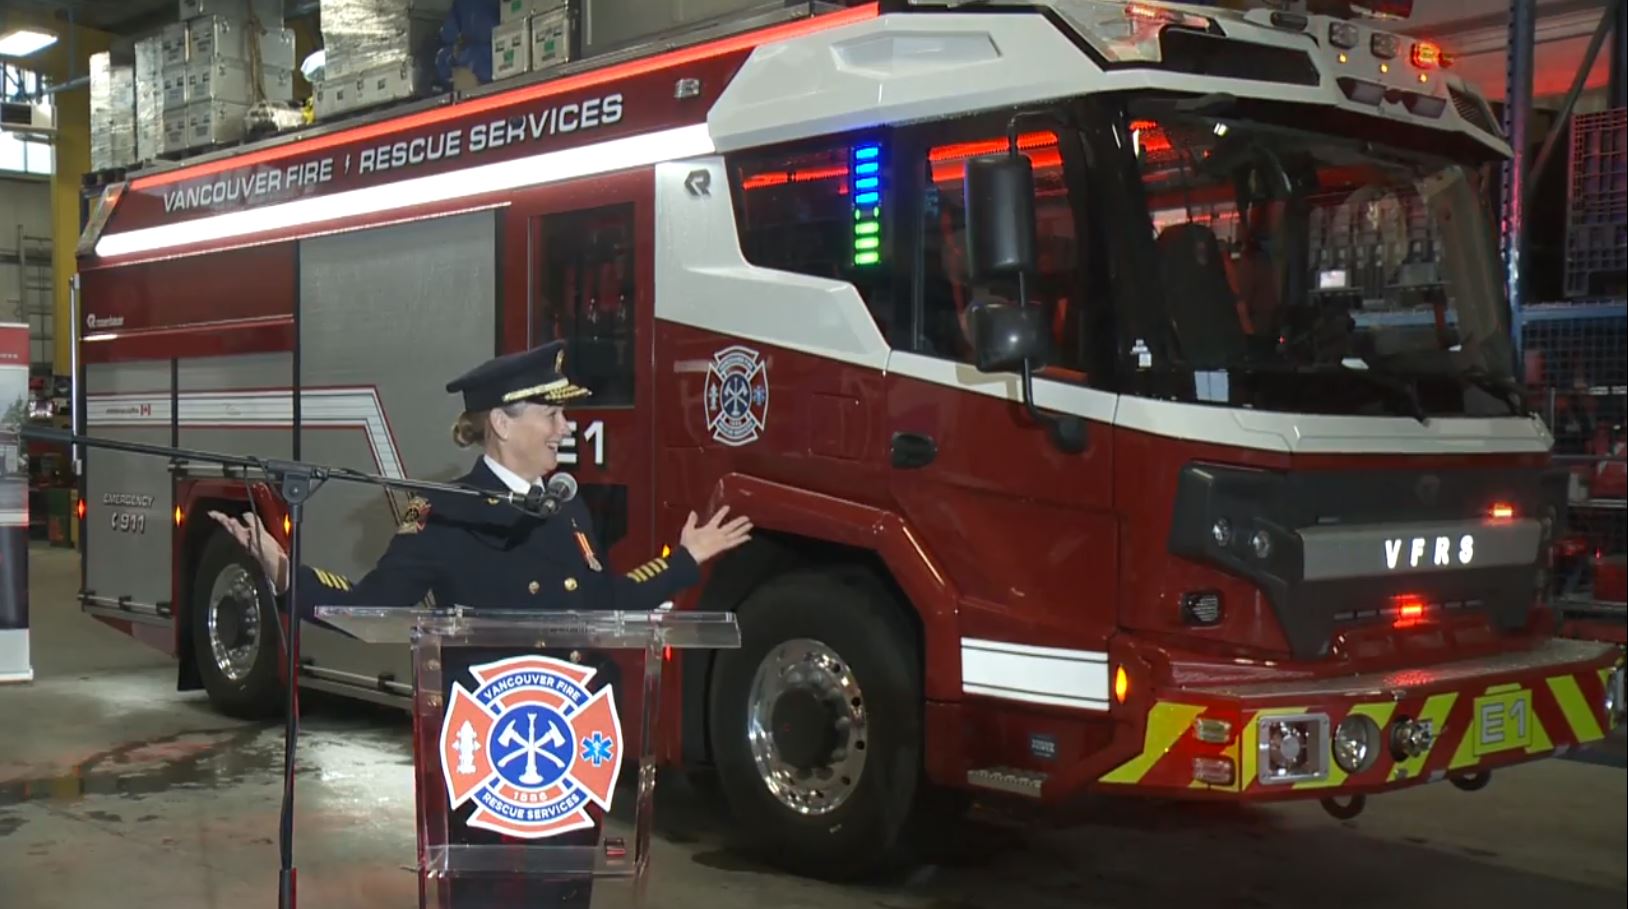 Canada's first electric fire engine unveiled in Vancouver